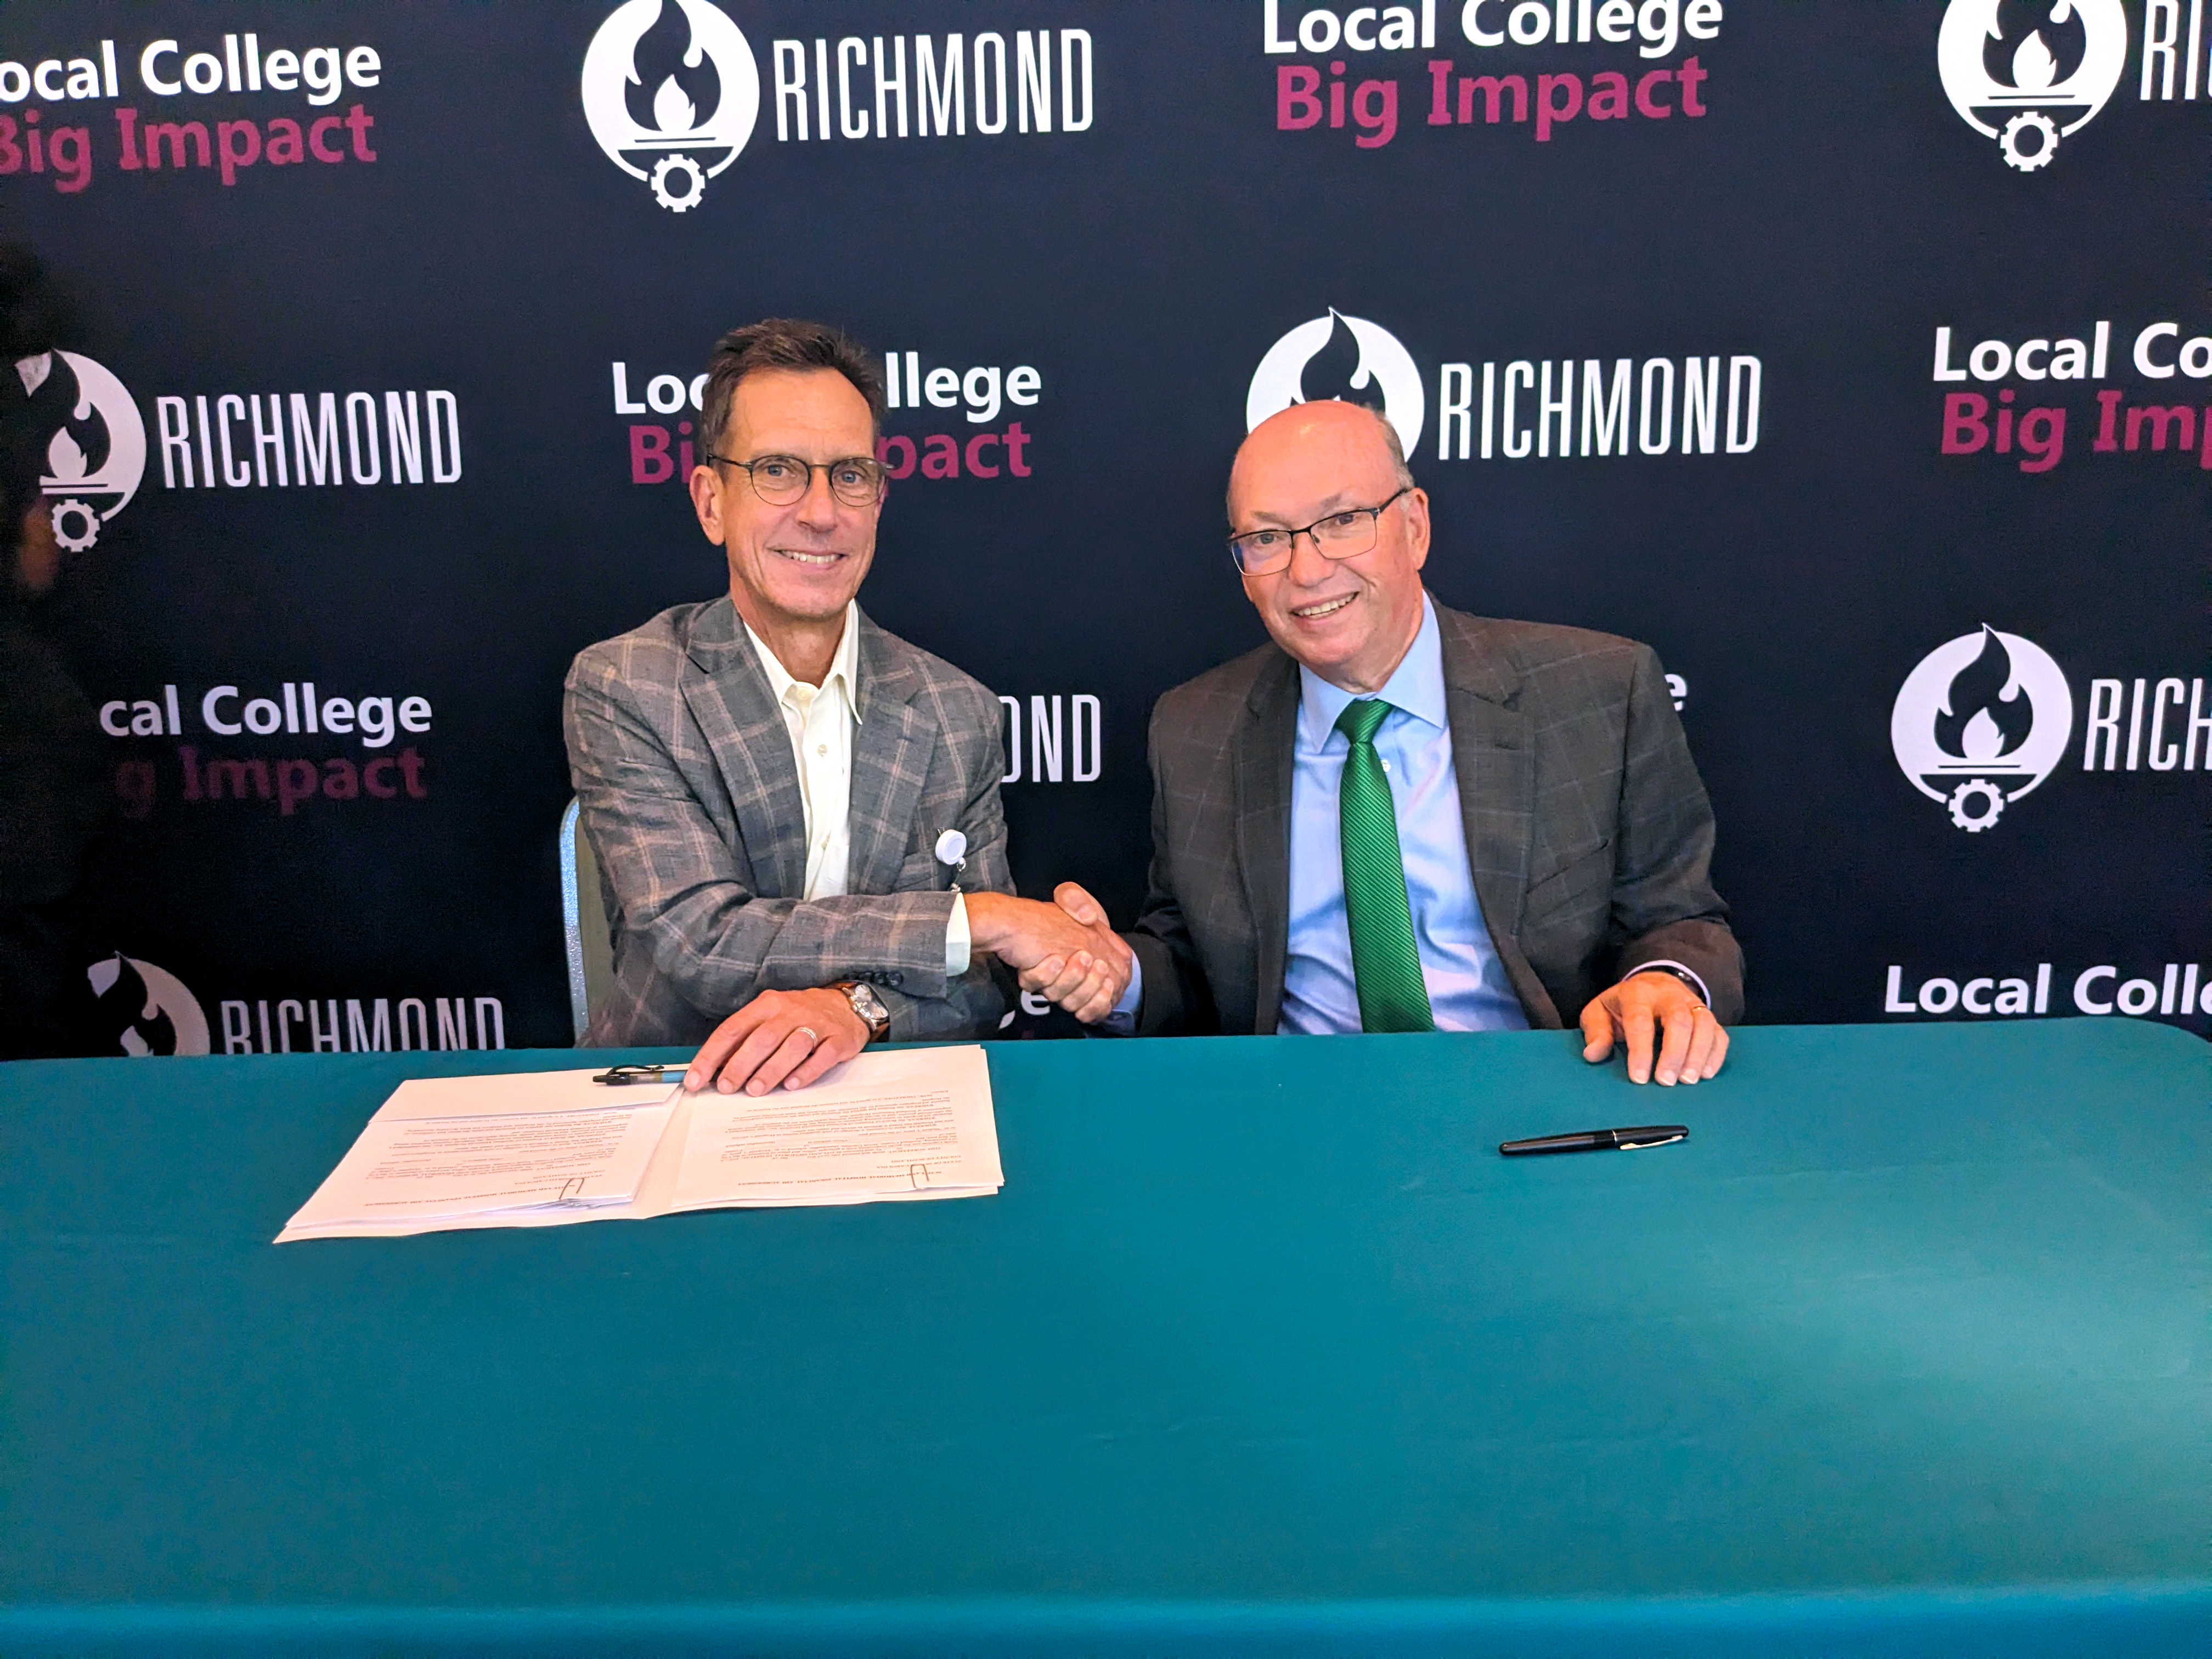 Scotland Health Care CEO Gregory Wood and Dr. Dale McInnis, president of RichmondCC, shake hands.